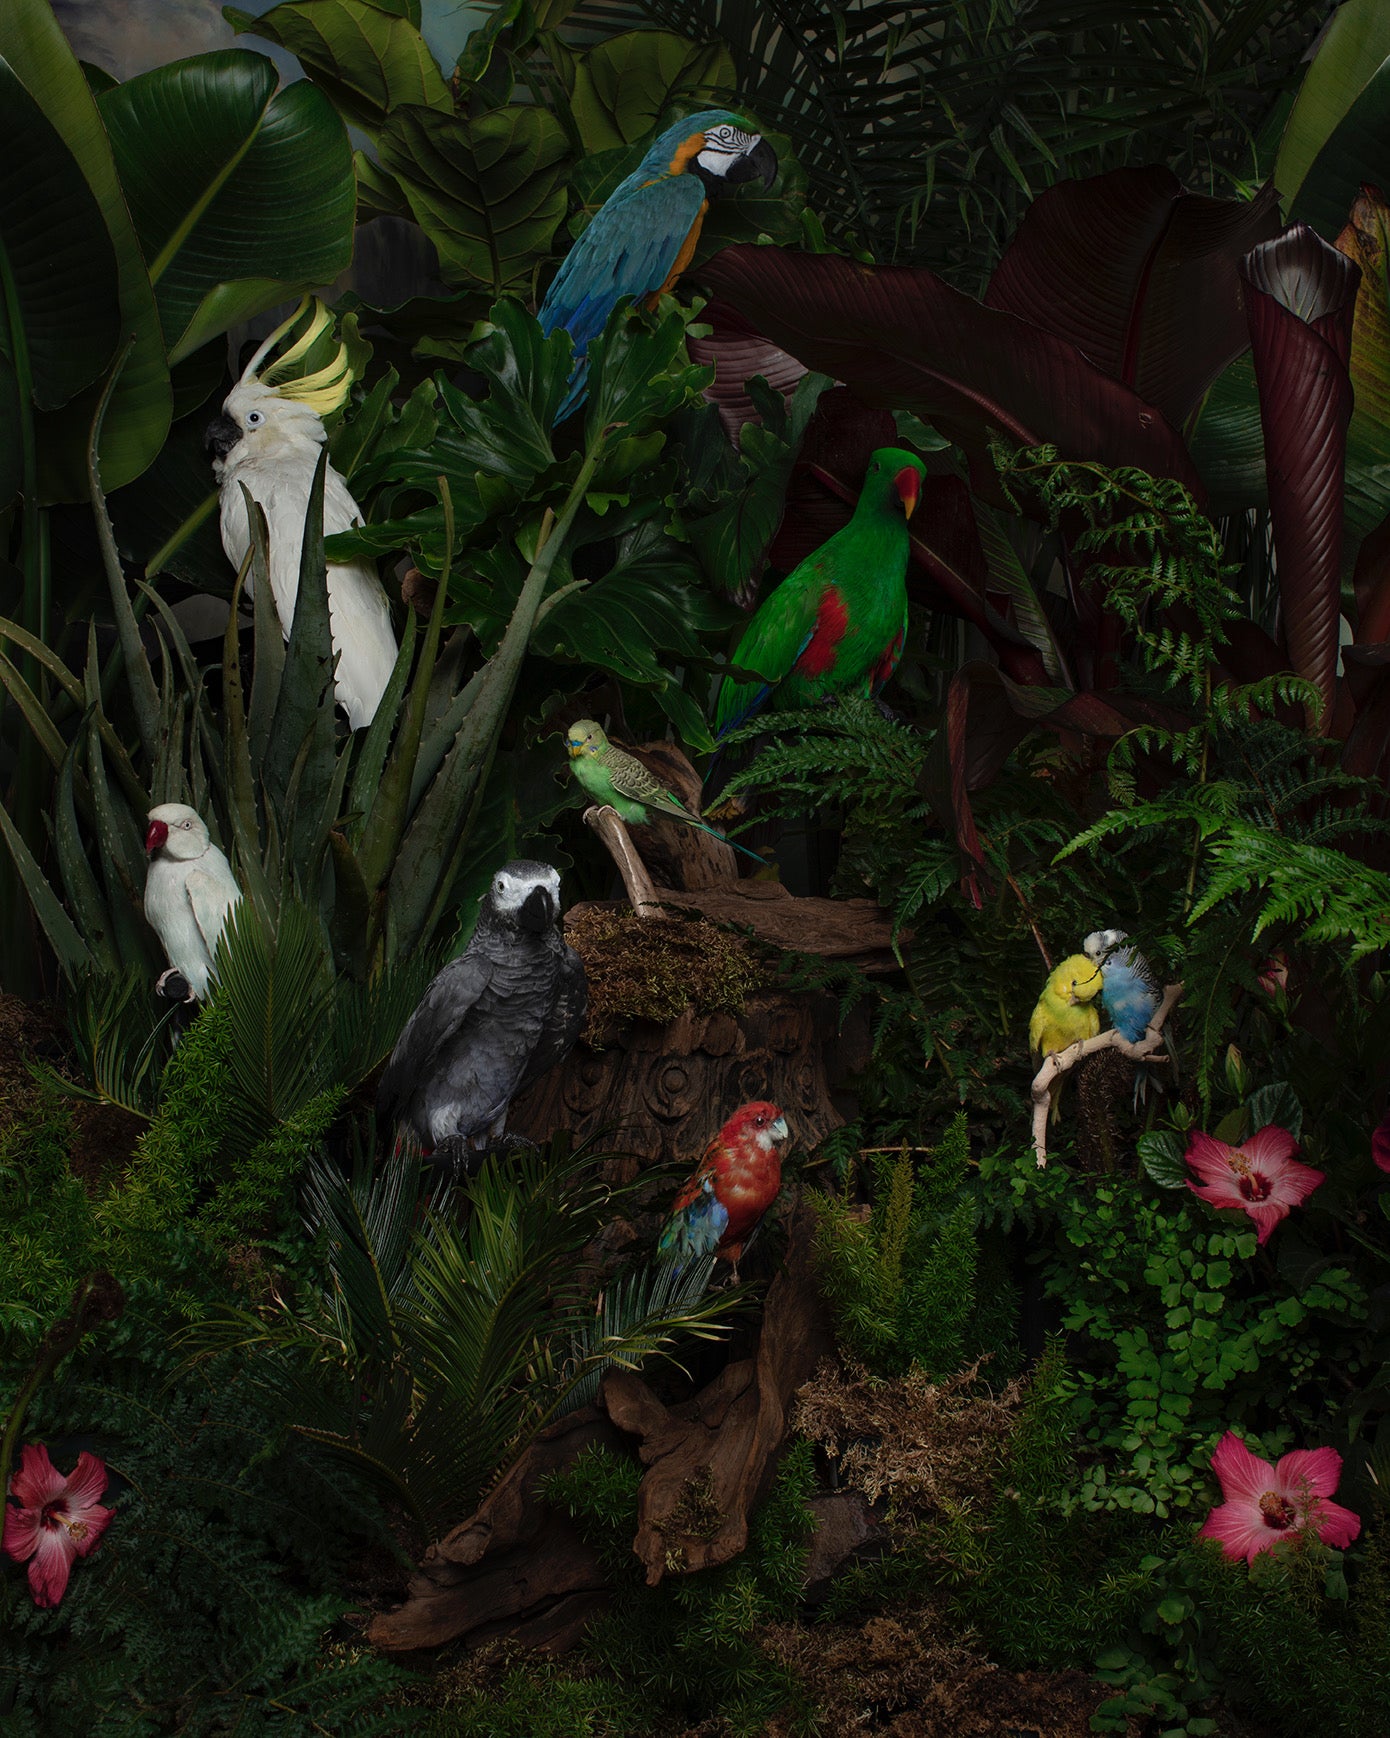 Parrots of the World. Original Photograph by Shelly Mosman.